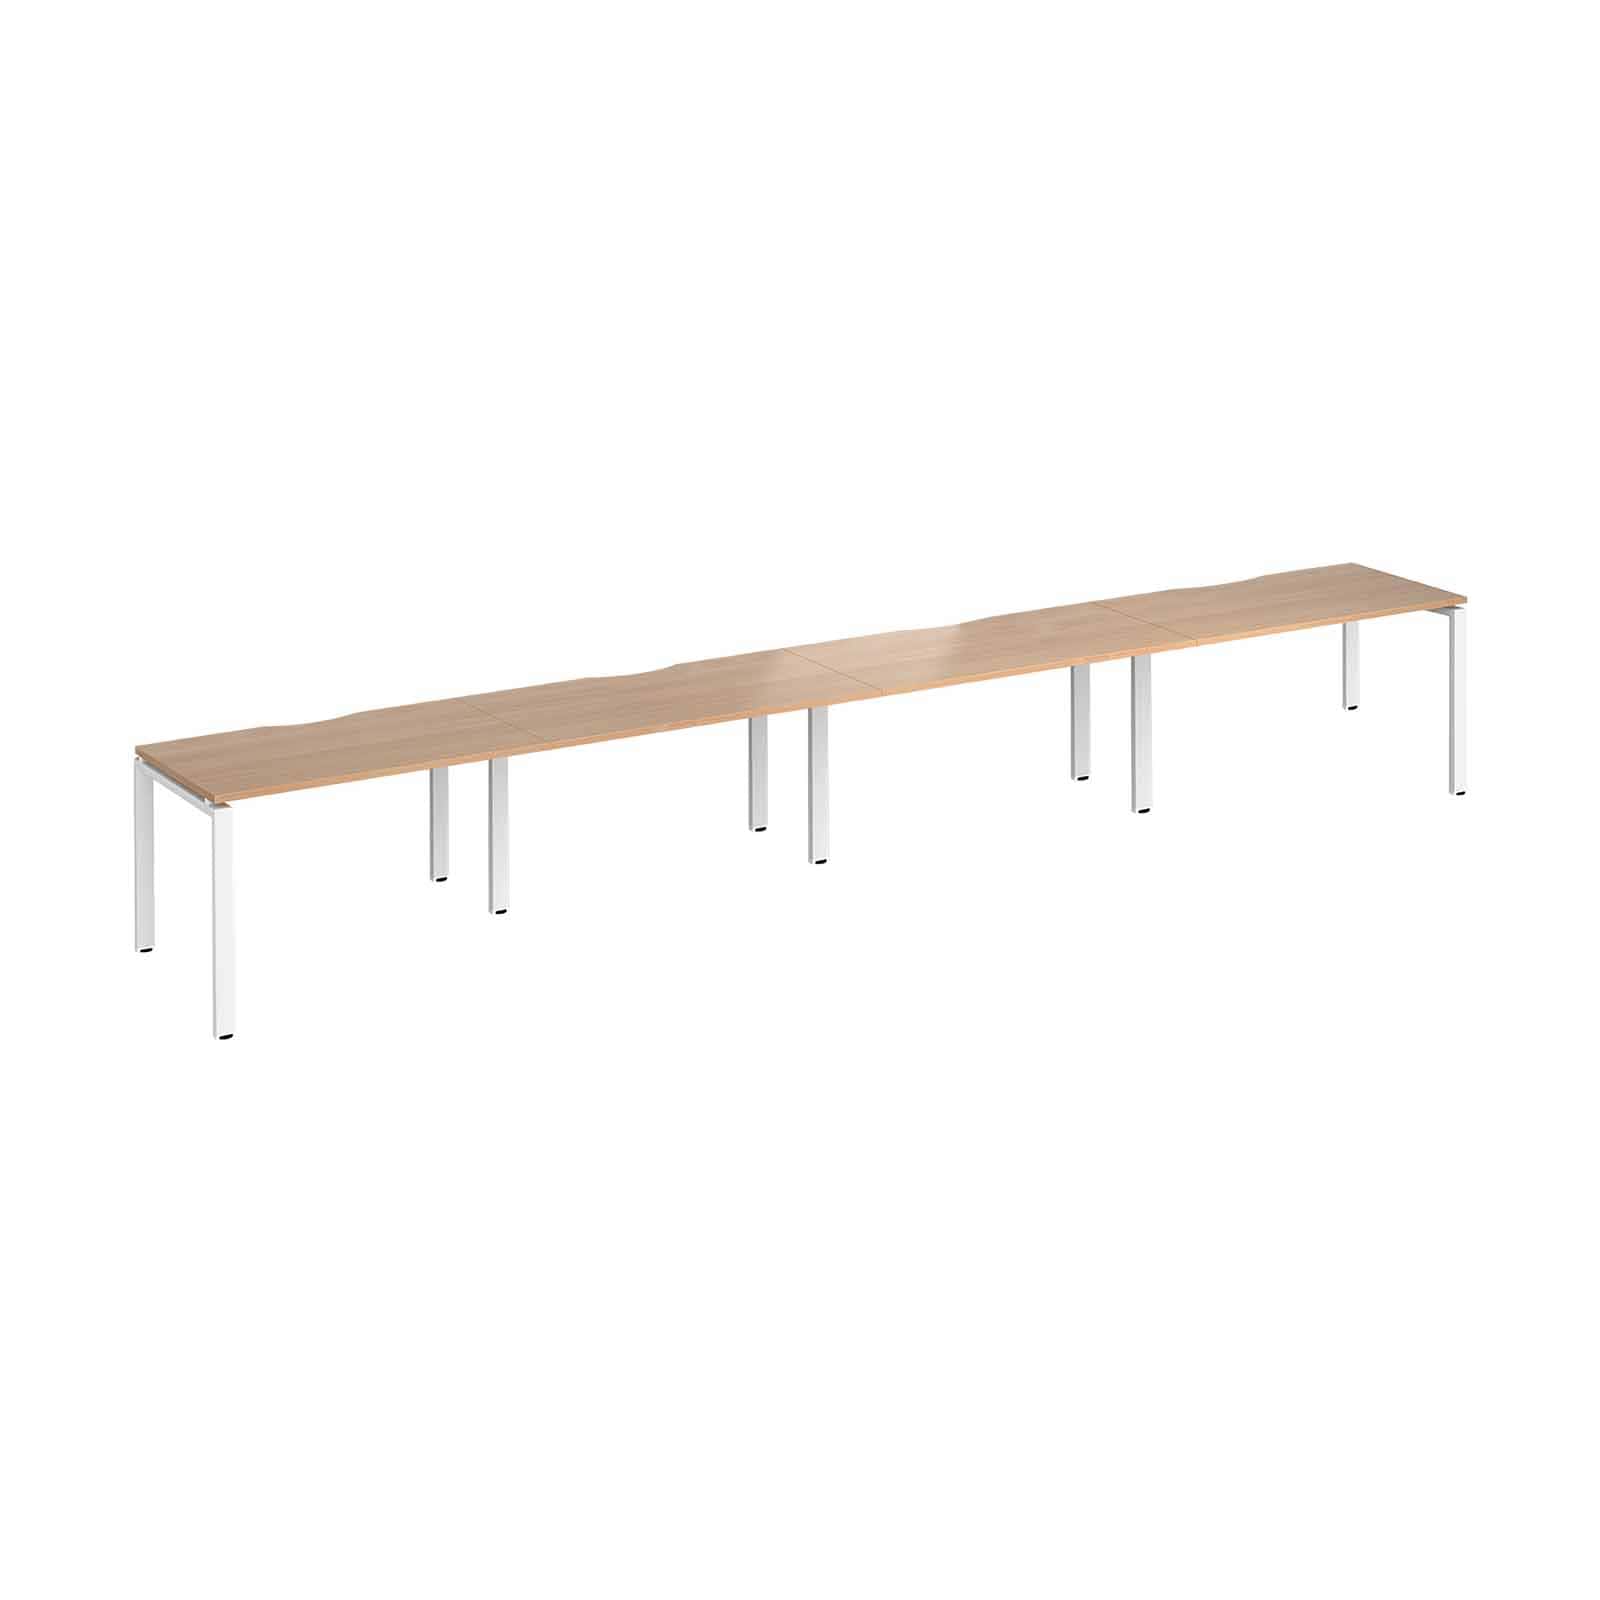 MADE TO ORDER 4 Person Single Row Bench Desk W1000mm x D600mm x H740mm